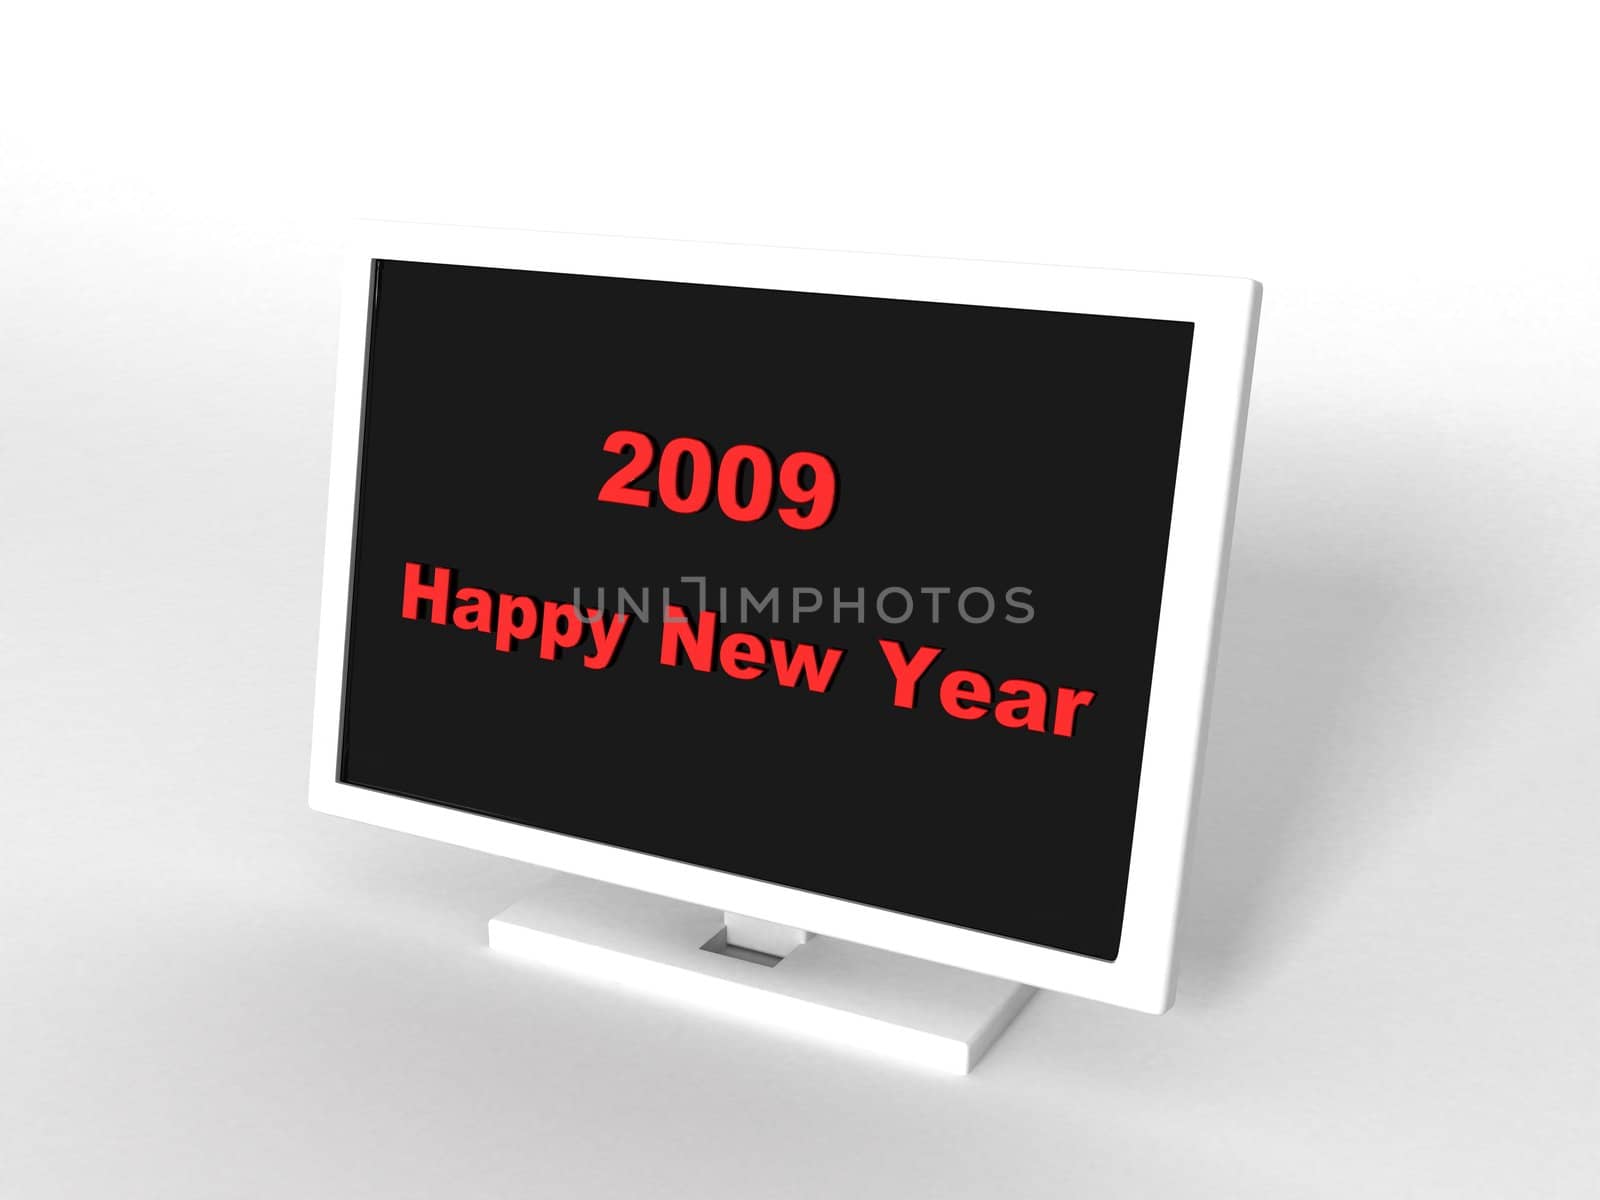 three dimensional monitor showing happy new year